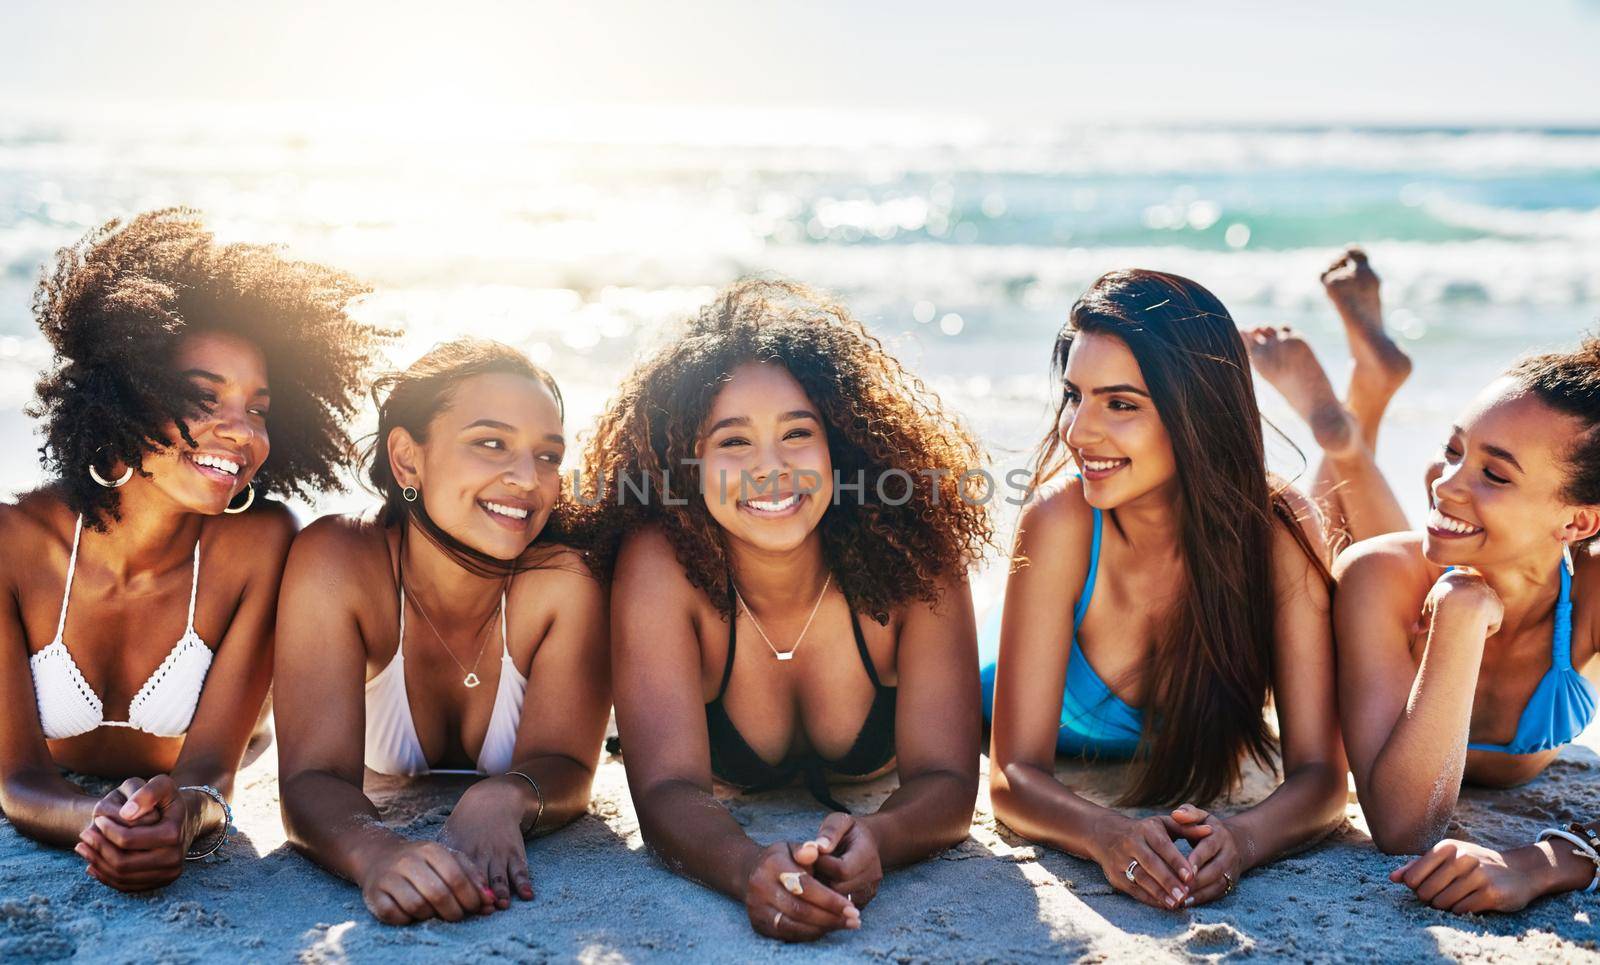 Portrait of a group of happy young women relaxing together at the beach.